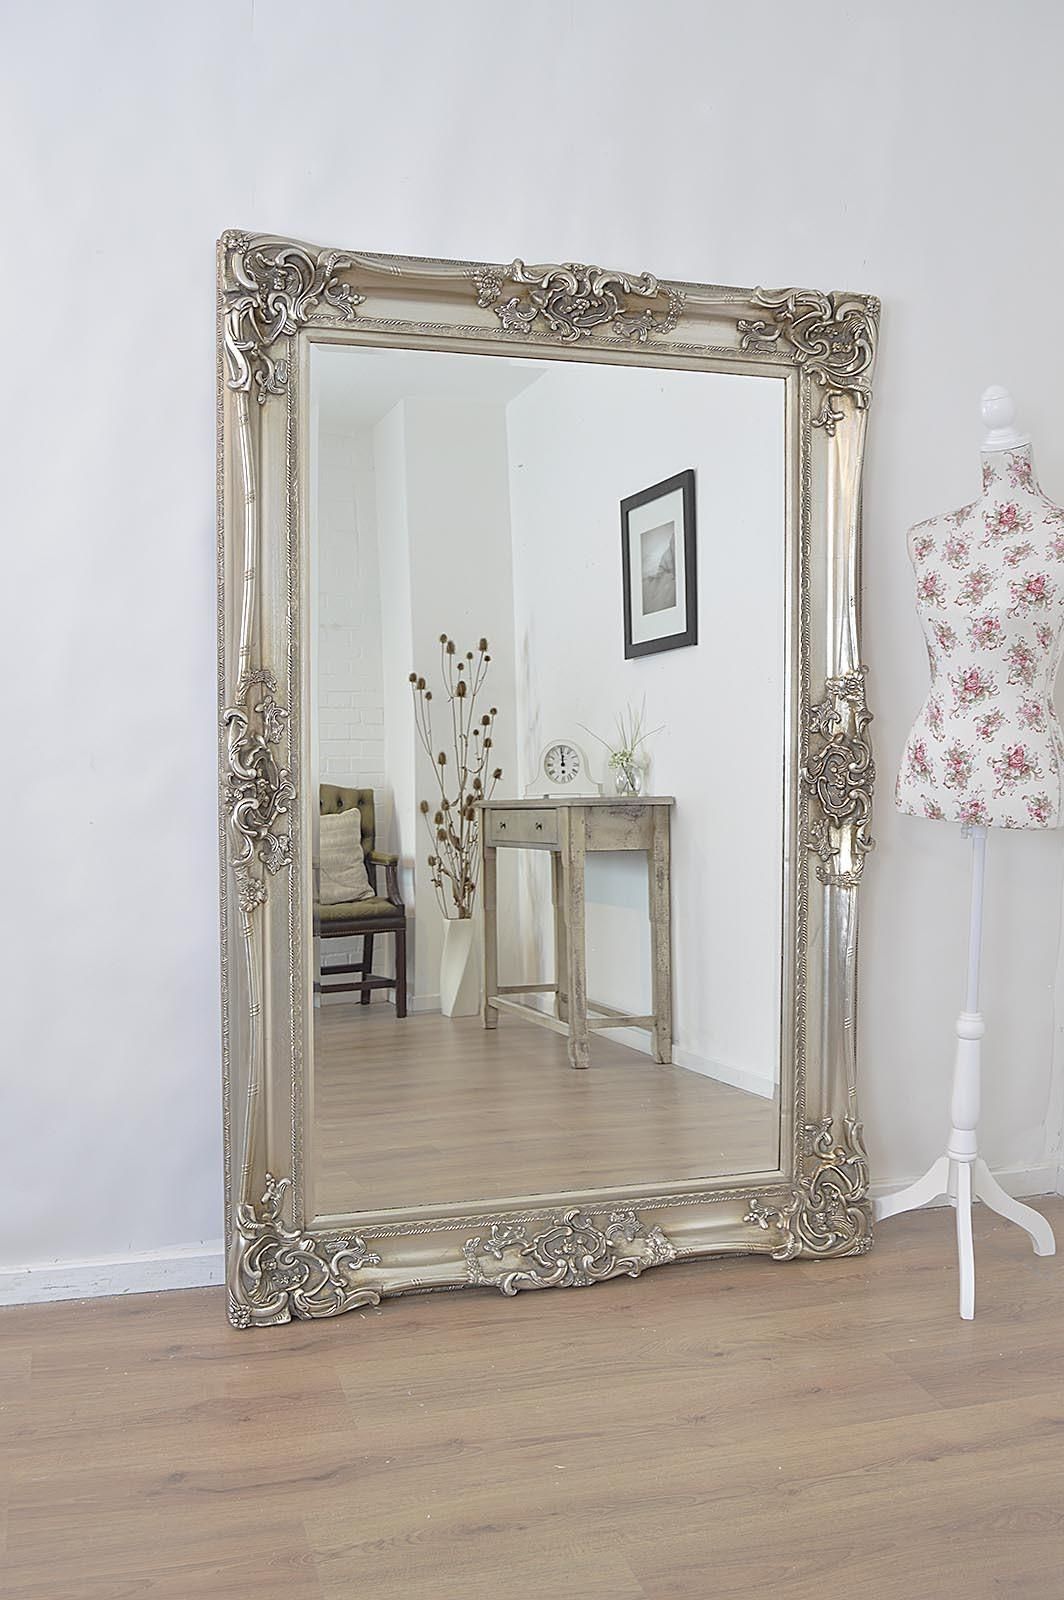 Vintage Mirrors For Sale Cape Town | Vanity And Nightstand Decoration Inside Antique Mirrors For Sale Vintage Mirrors (Photo 3 of 20)